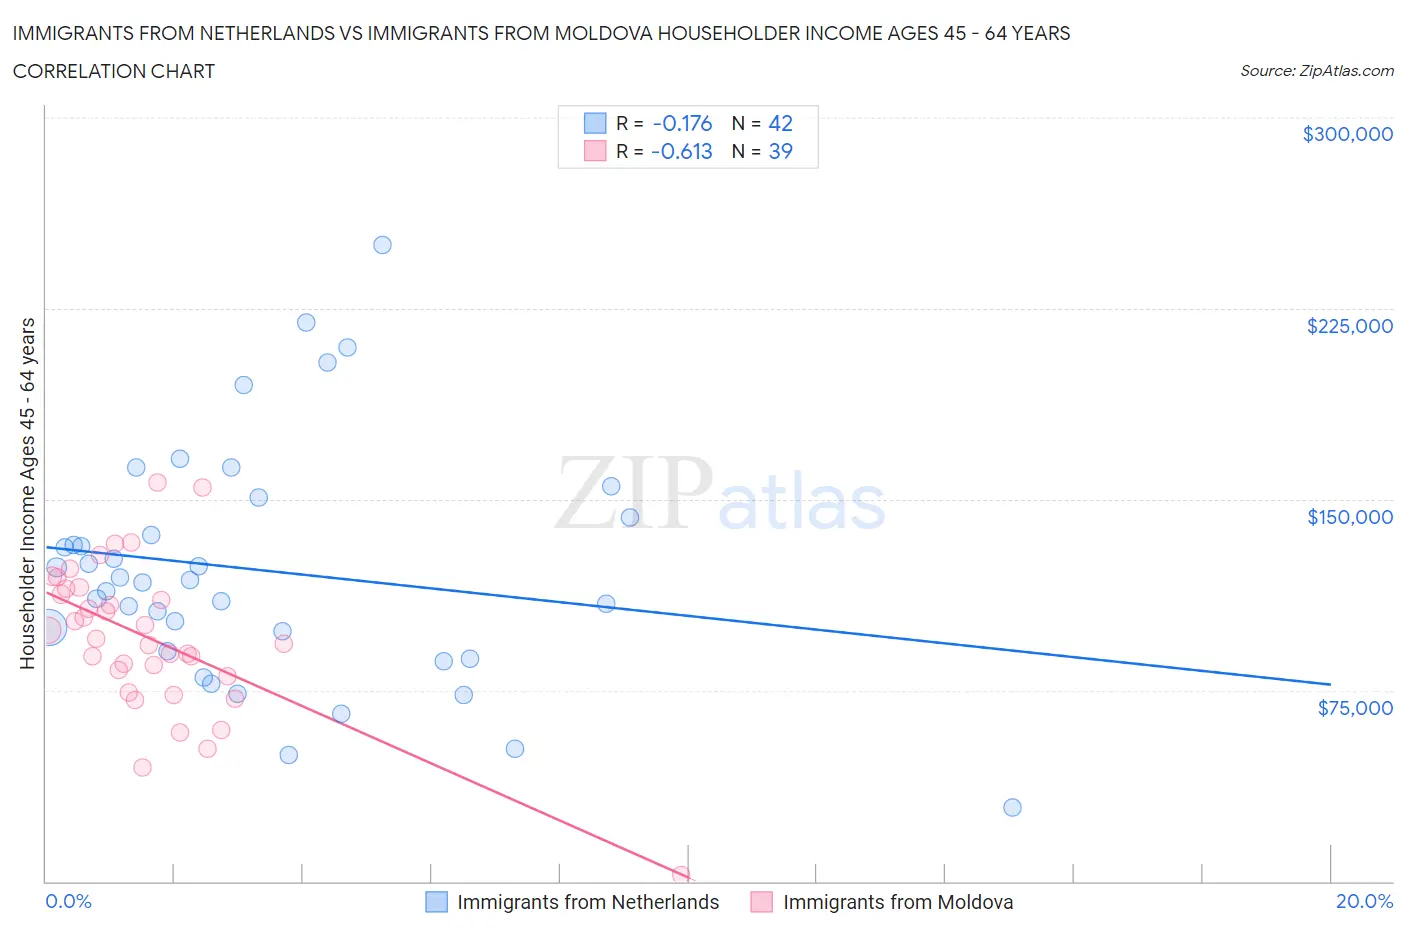 Immigrants from Netherlands vs Immigrants from Moldova Householder Income Ages 45 - 64 years